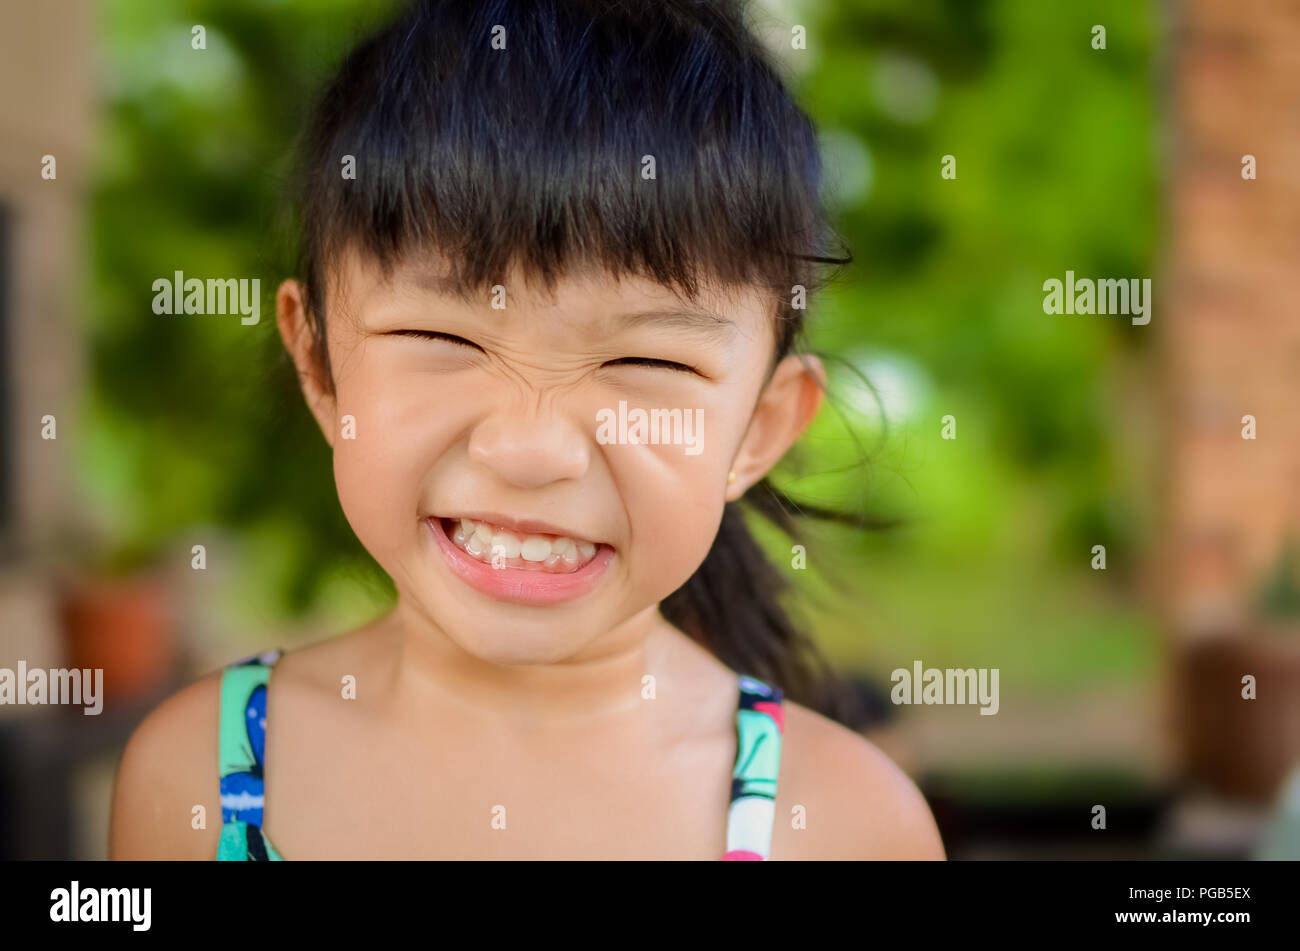 Portrait of an angry girl or girl making face isolated in a blurred natural background Stock Photo